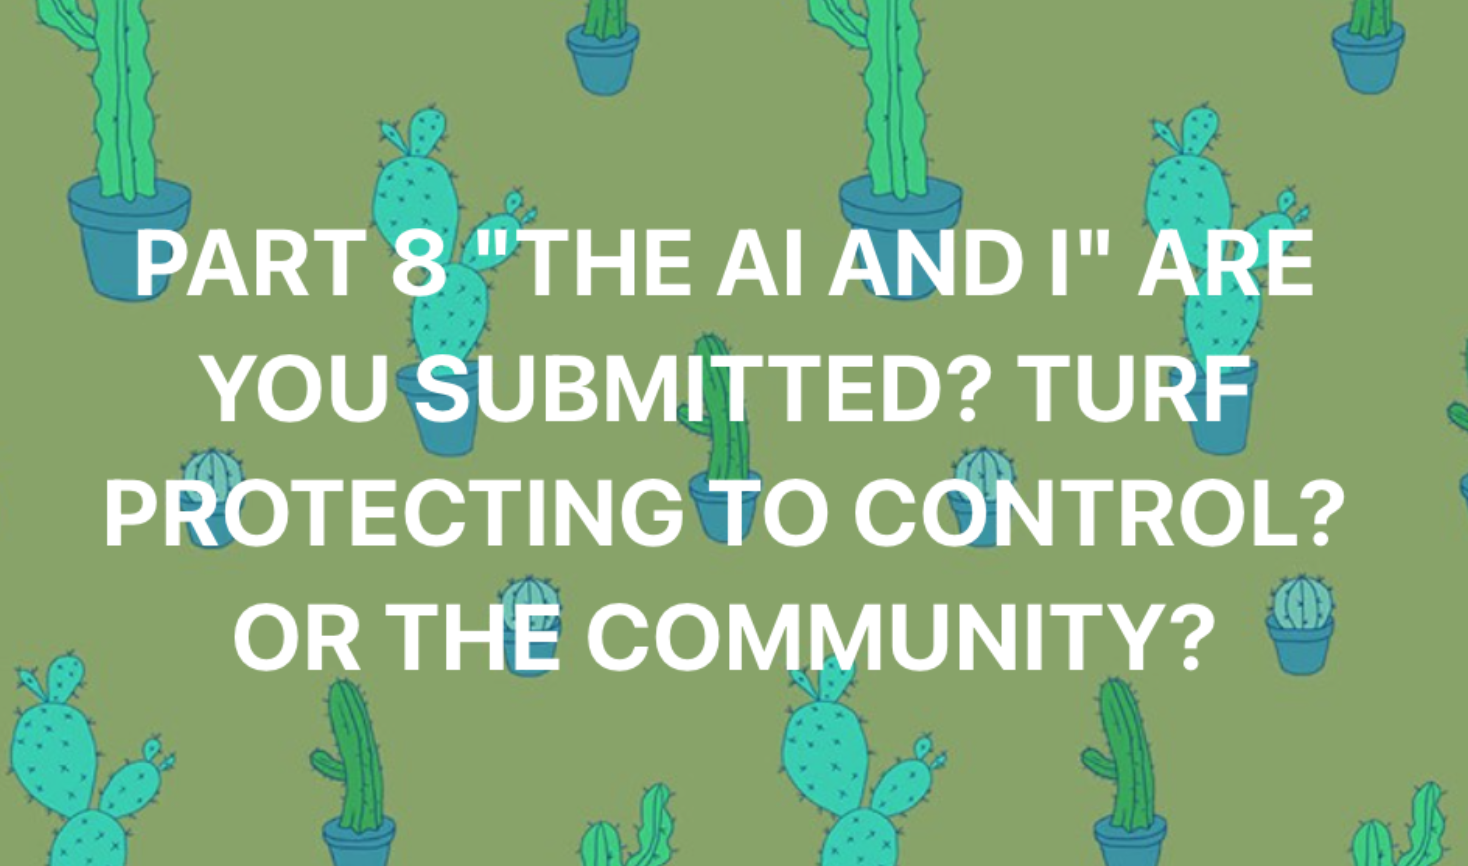 PART 8 “THE AI AND I” ARE YOU SUBMITTED? TO TURF PROTECTING OR TRUE COMMUNITY?